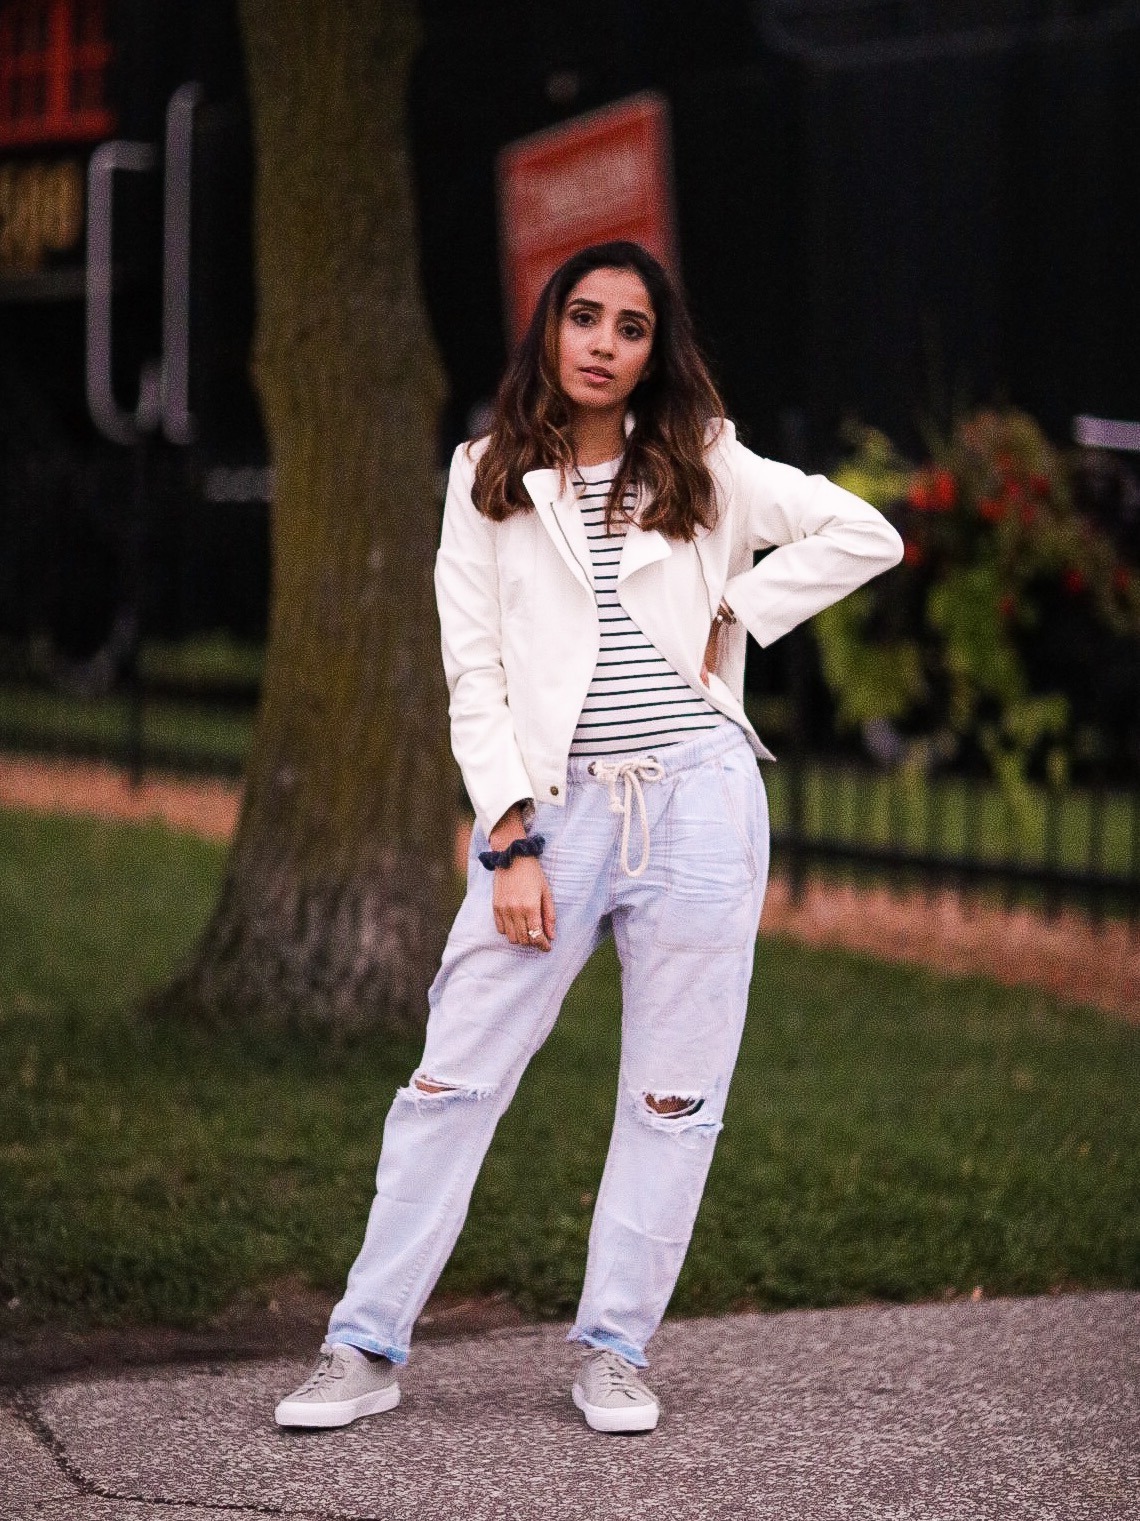 Distressed Jeans for Days Lulus LIGHT WASH DRAWSTRING Faiza Inam Casual Look Summer Fall Fashion Style Toronto Blogger 3